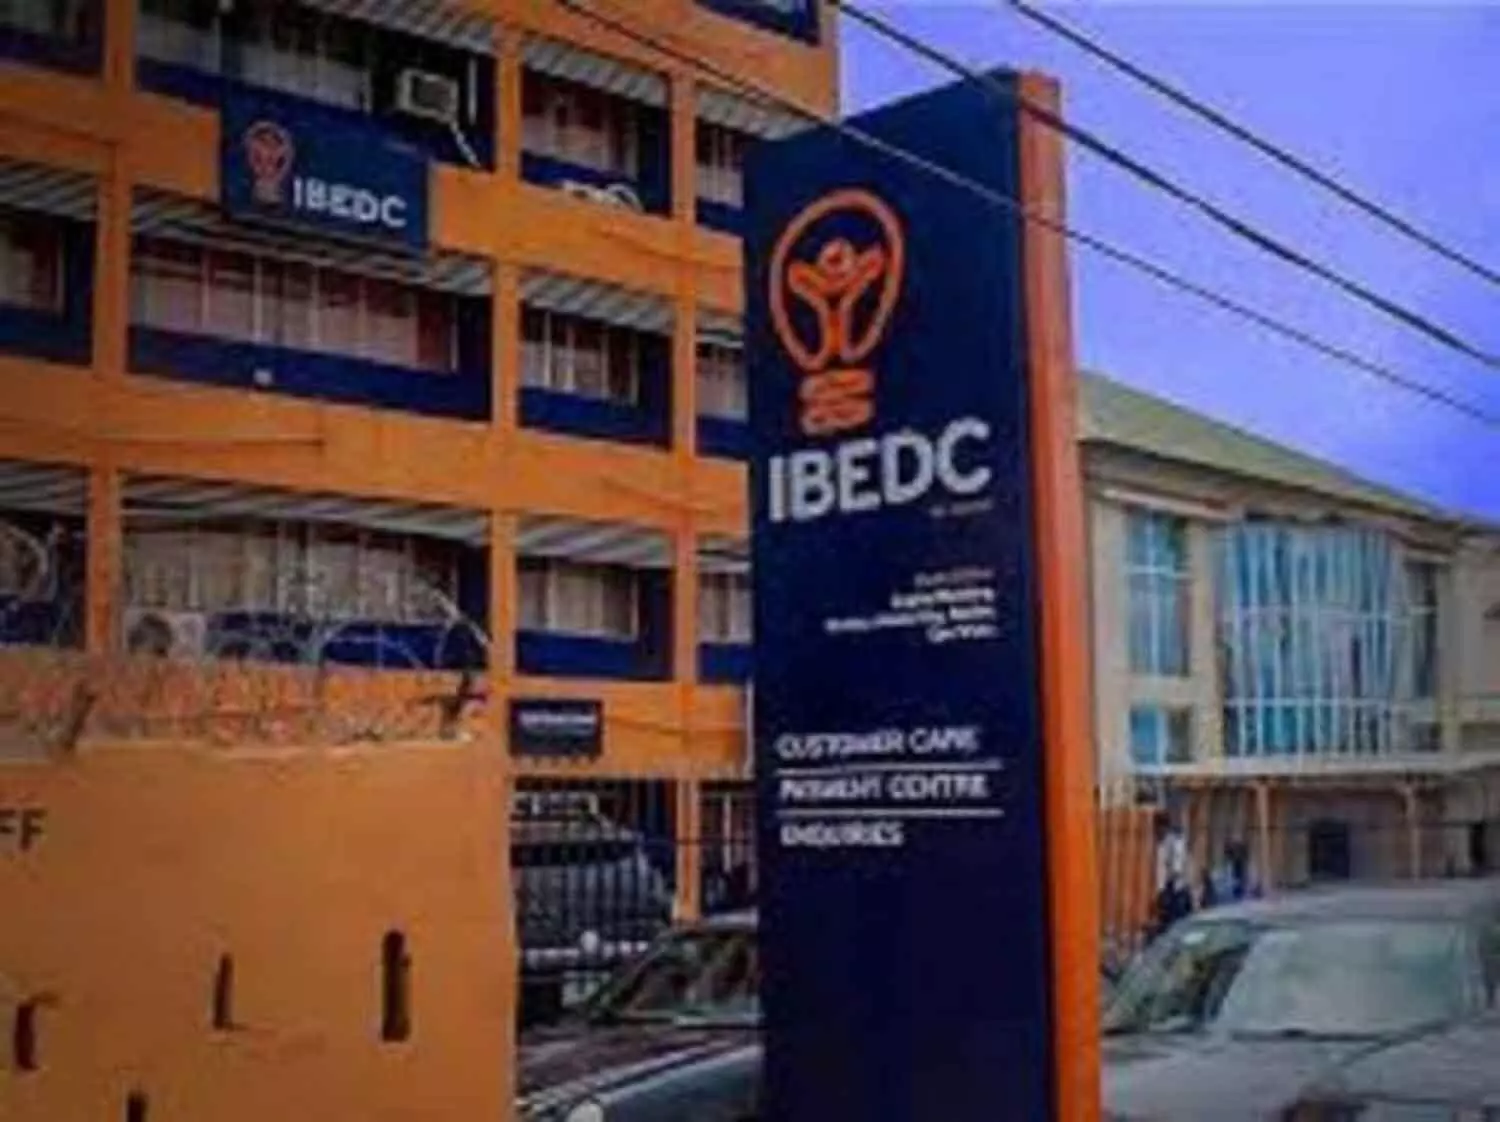 IBEDC appeals to Ogun community over power outage